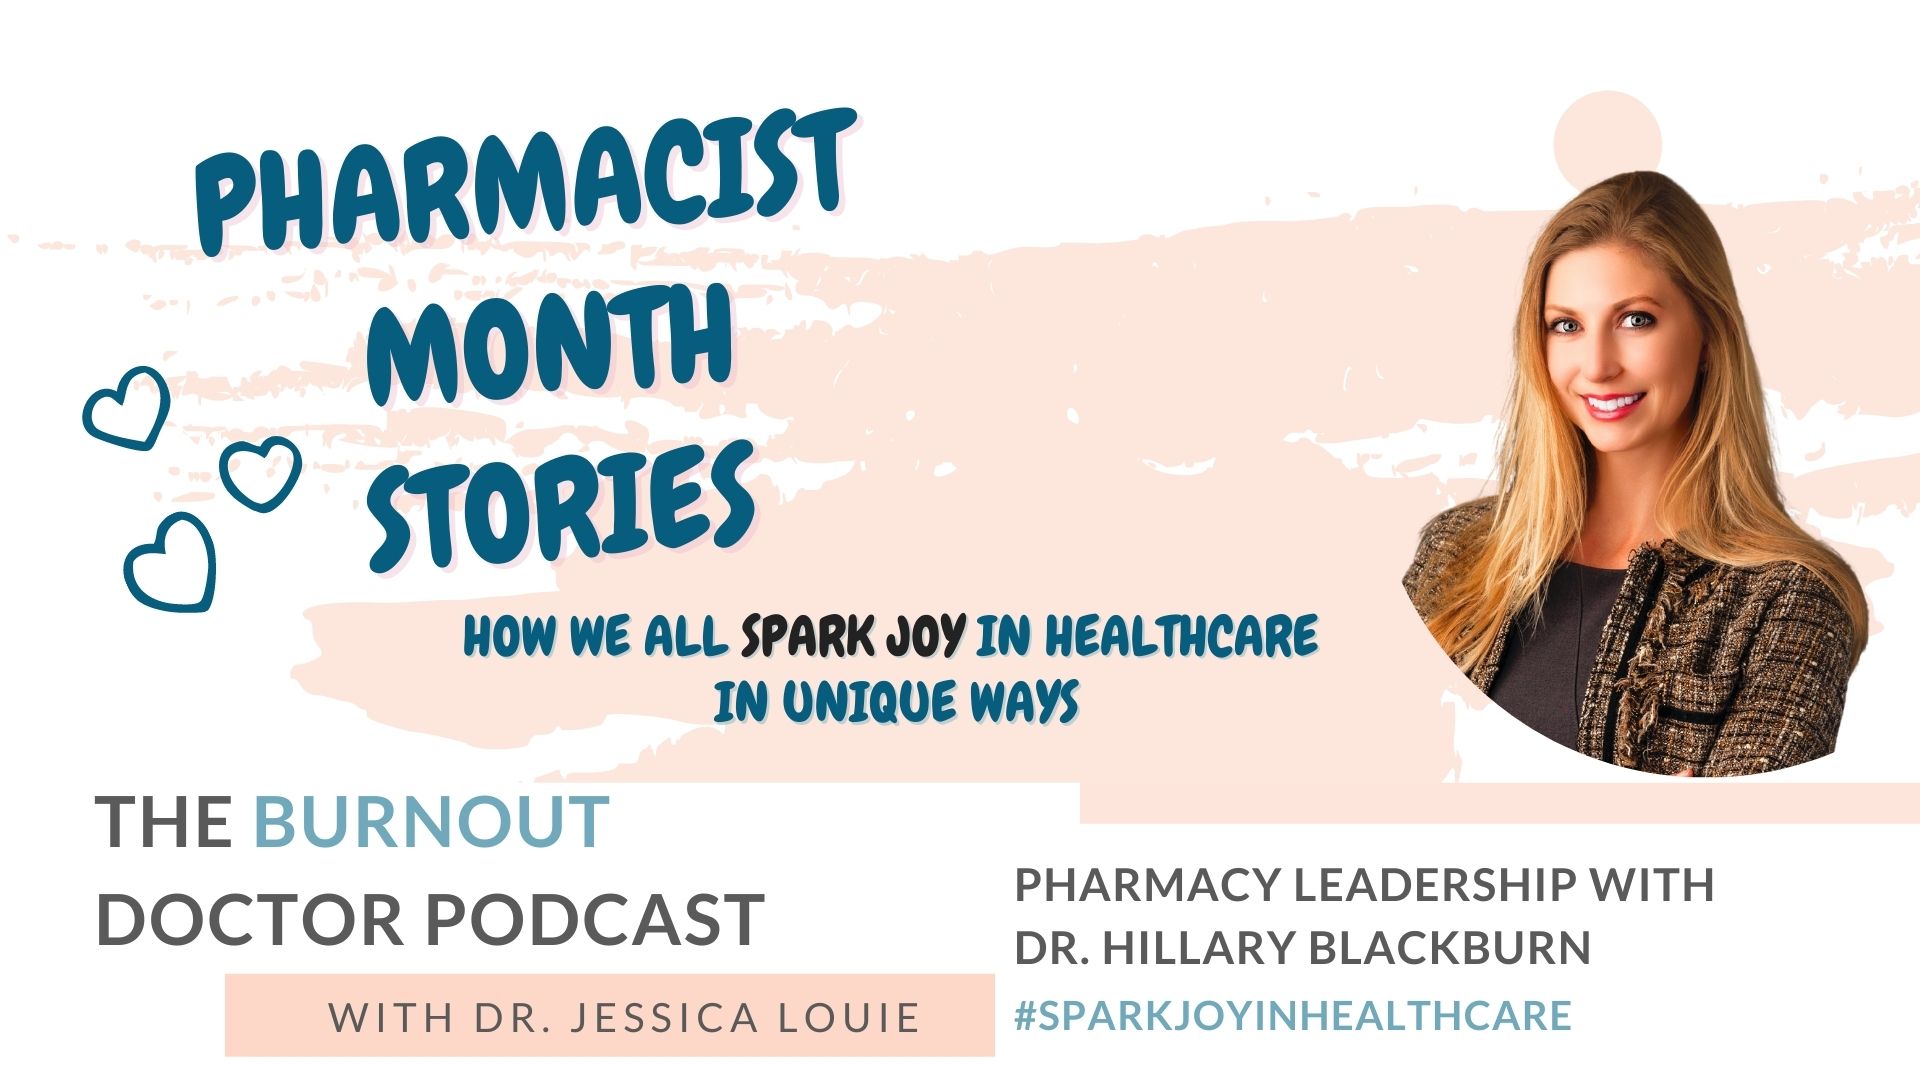 Dr. Hillary Blackburn on The Burnout Doctor Podcast with Dr. Jessica Louie. Talk to your Pharmacist Podcast. Women in pharmacy leadership. Pharmacist burnout coaching. KonMari Method and simplifying healthcare families.